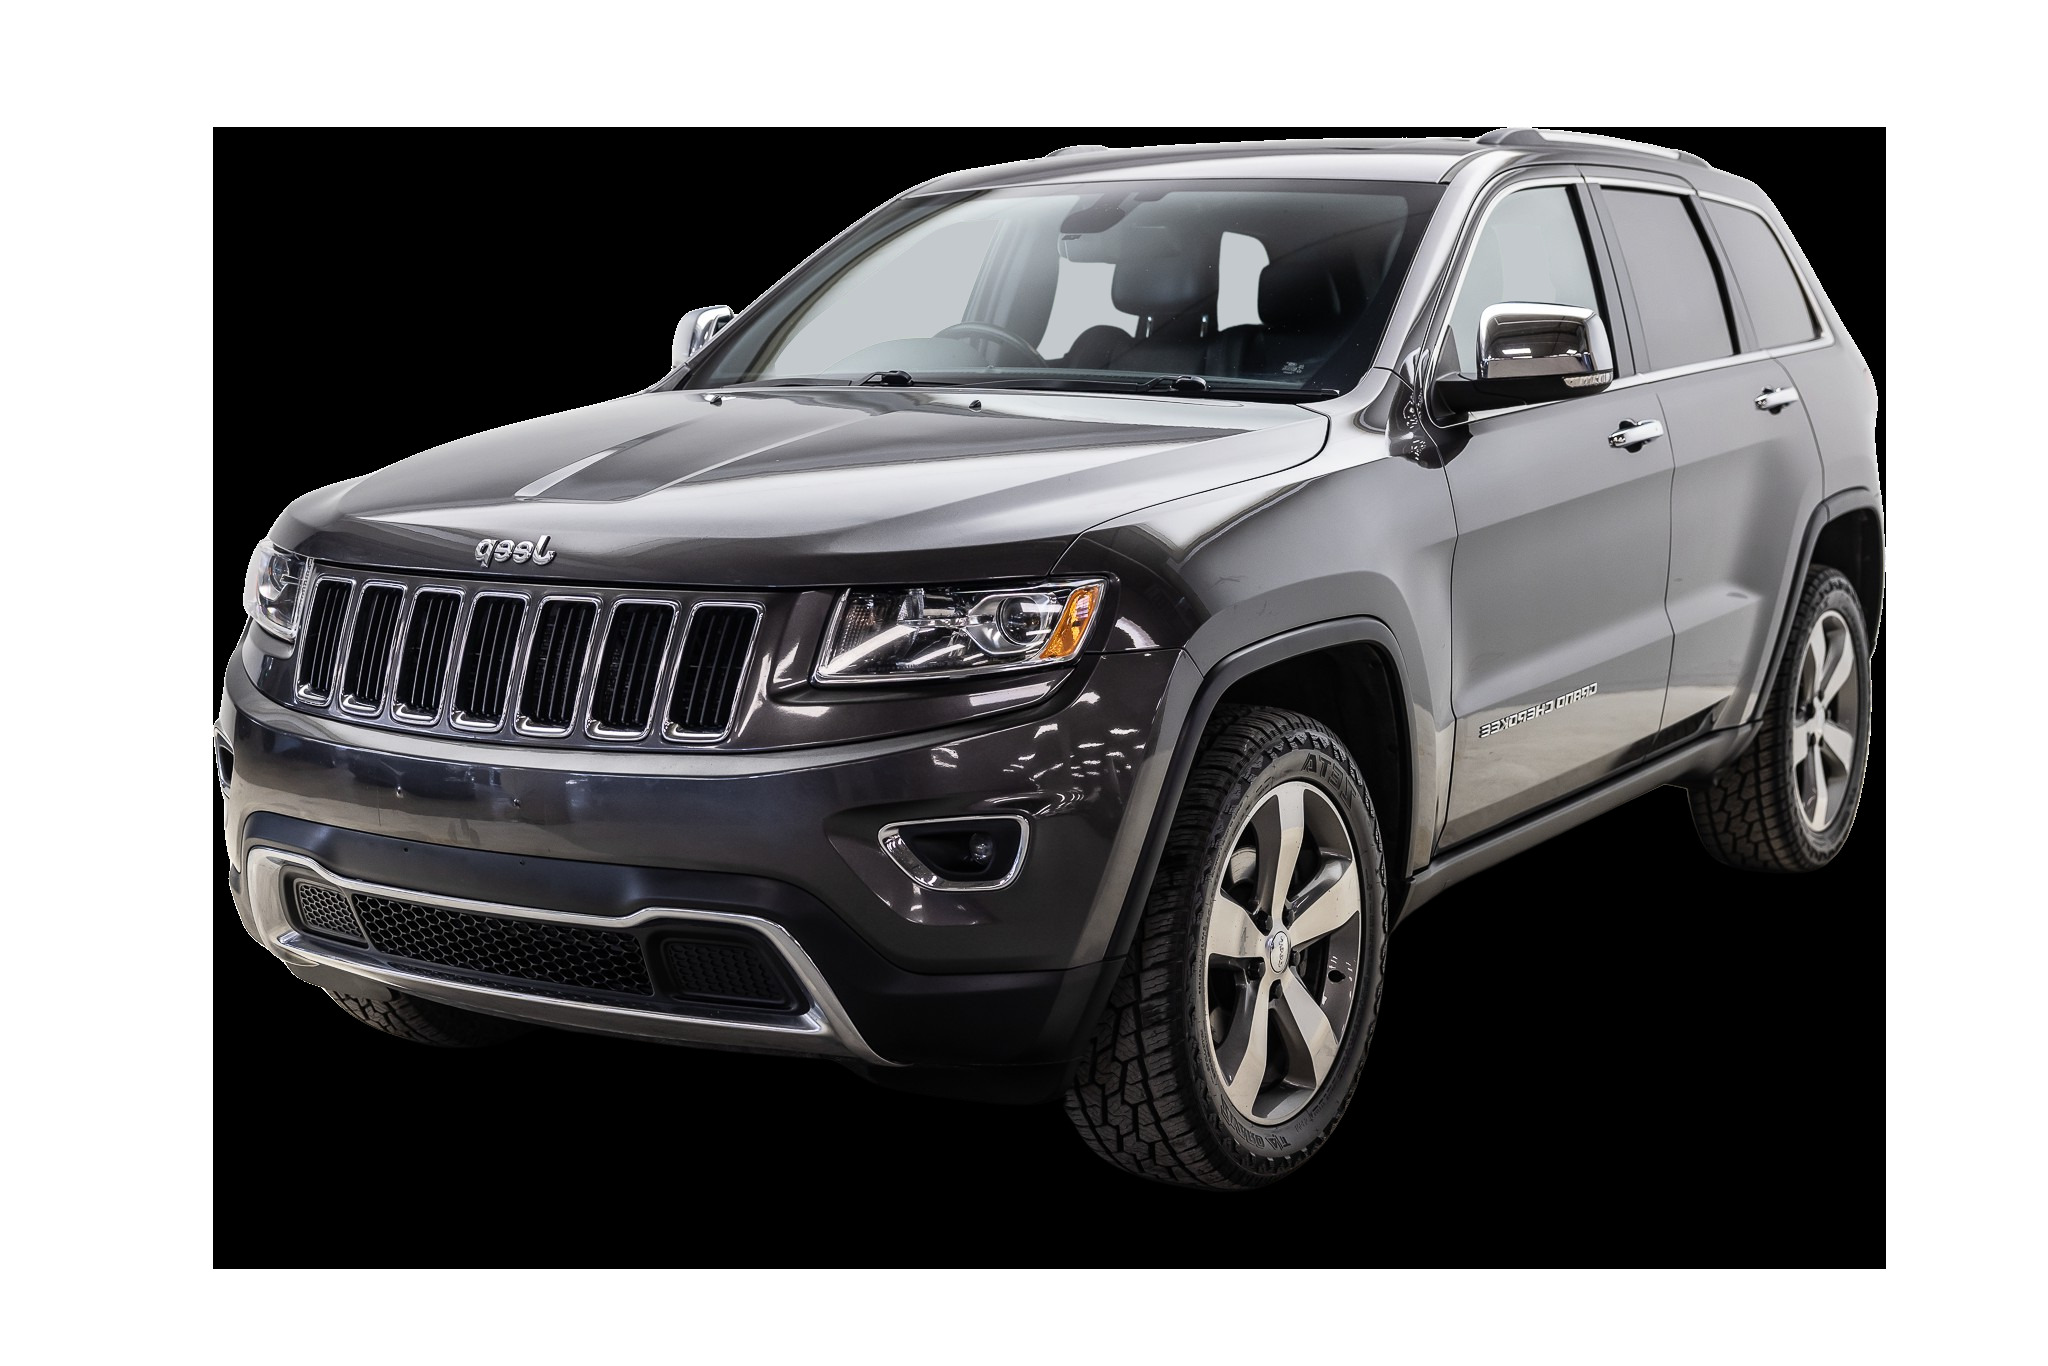 2016 Jeep Grand Cherokee RESERVED - 4WD 4dr Limited